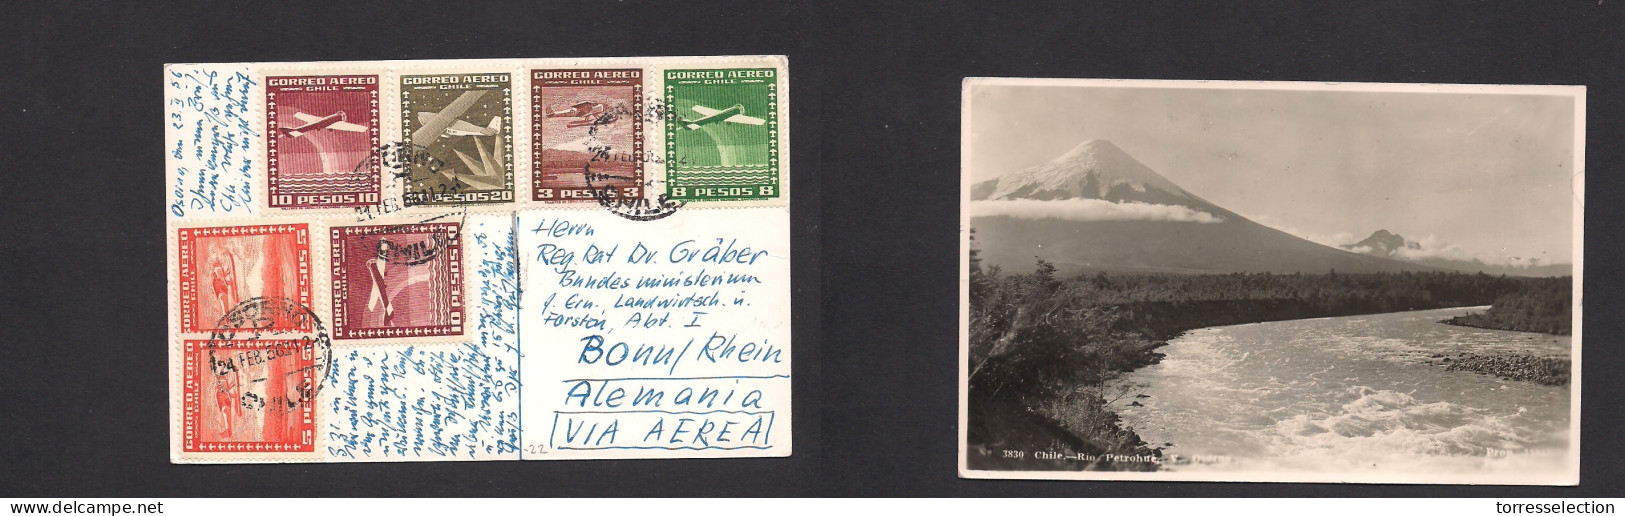 Chile - XX. 1956 (24 Febr) Osorno - West Germany, Bonn. Air Multifkd Env At 61 Pesos Rate, Tied Cds. Attractive. - Chile